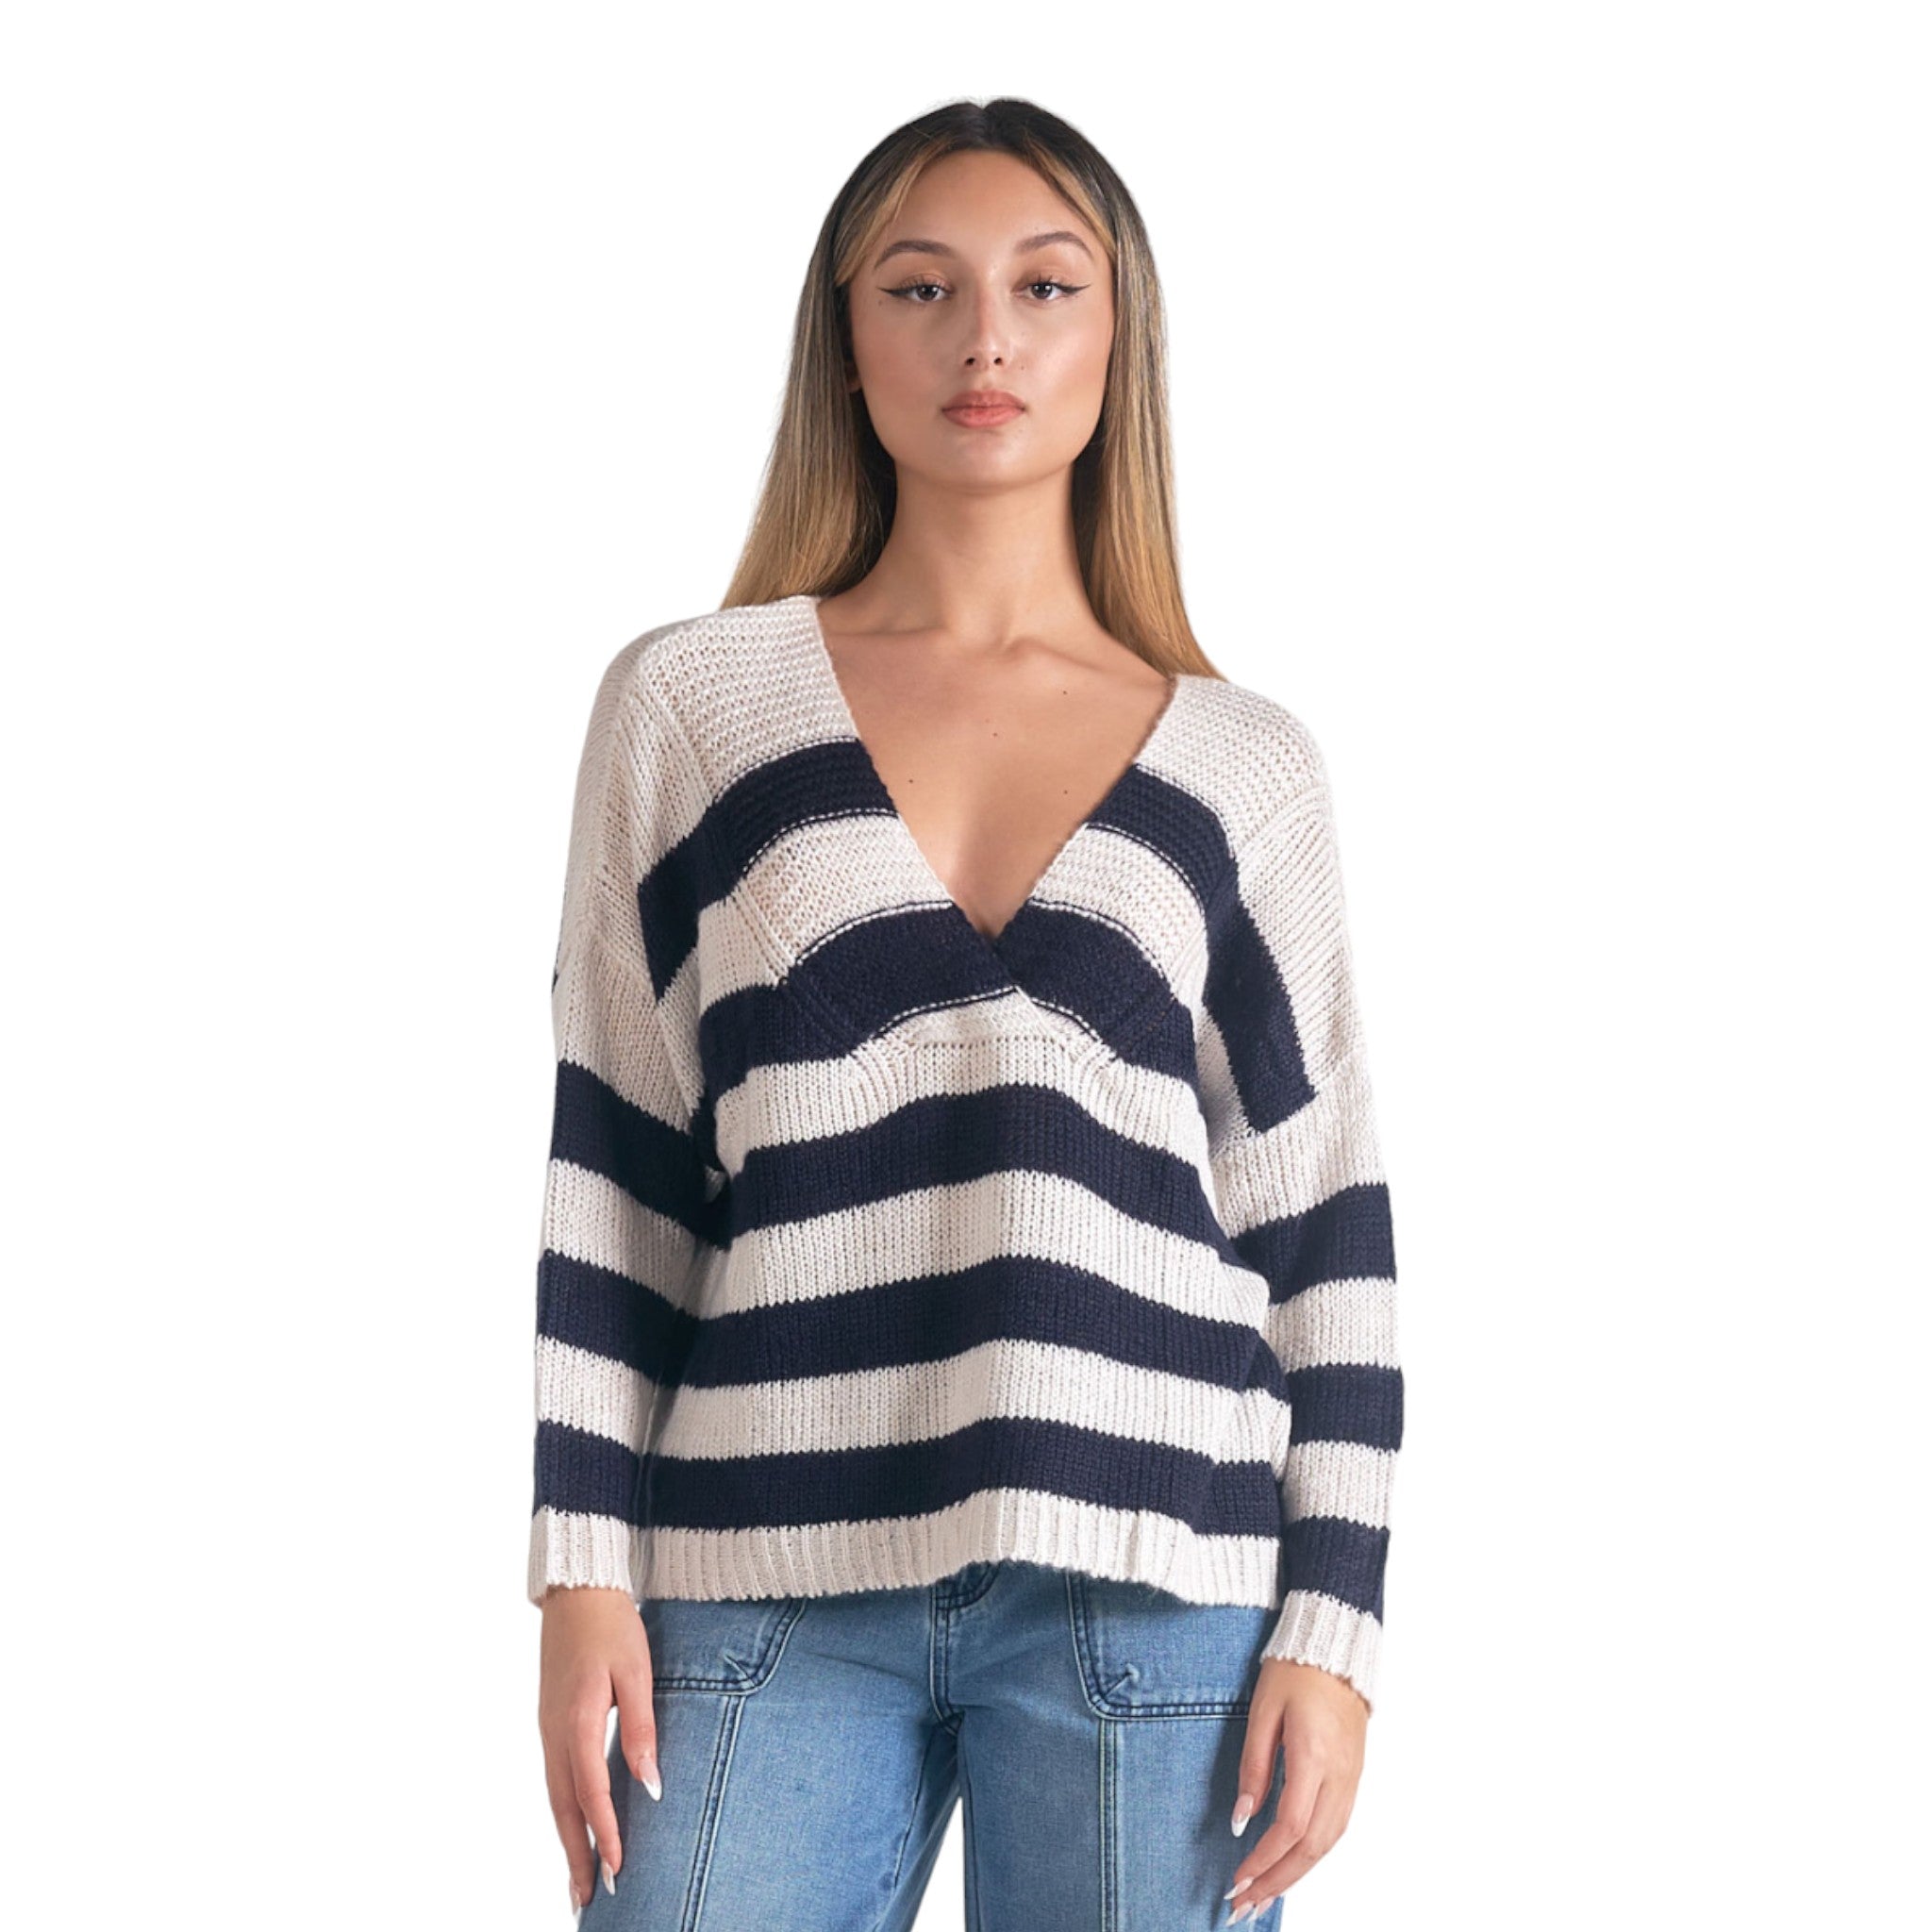 Navy and white striped v neck sweater.